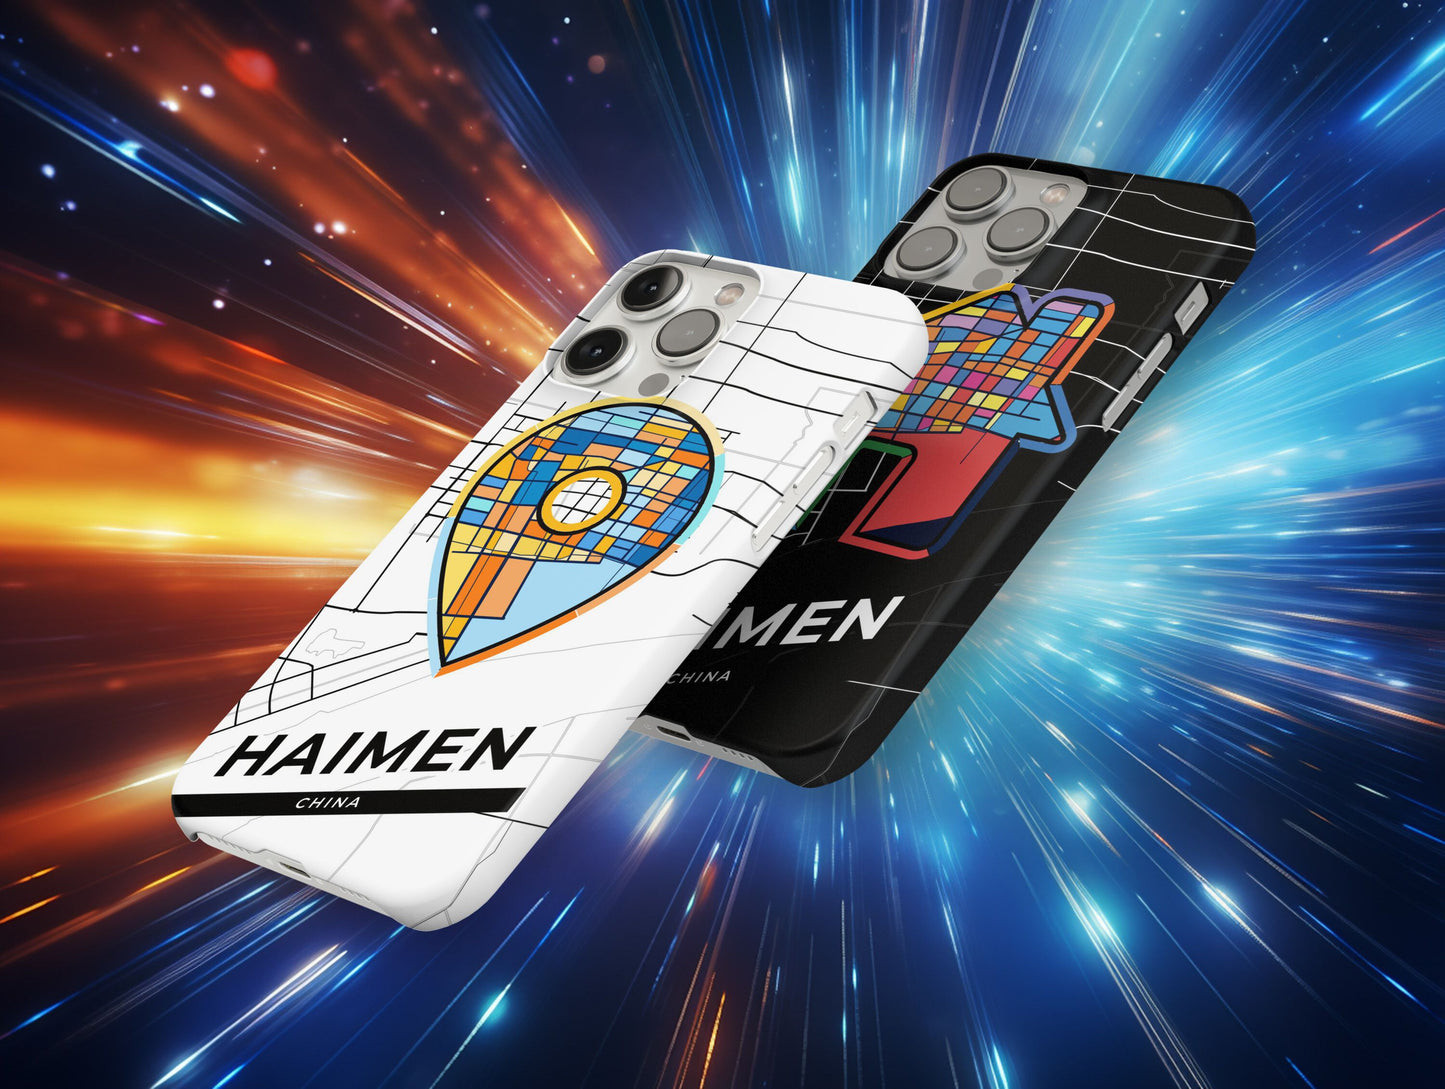 Haimen China slim phone case with colorful icon. Birthday, wedding or housewarming gift. Couple match cases.